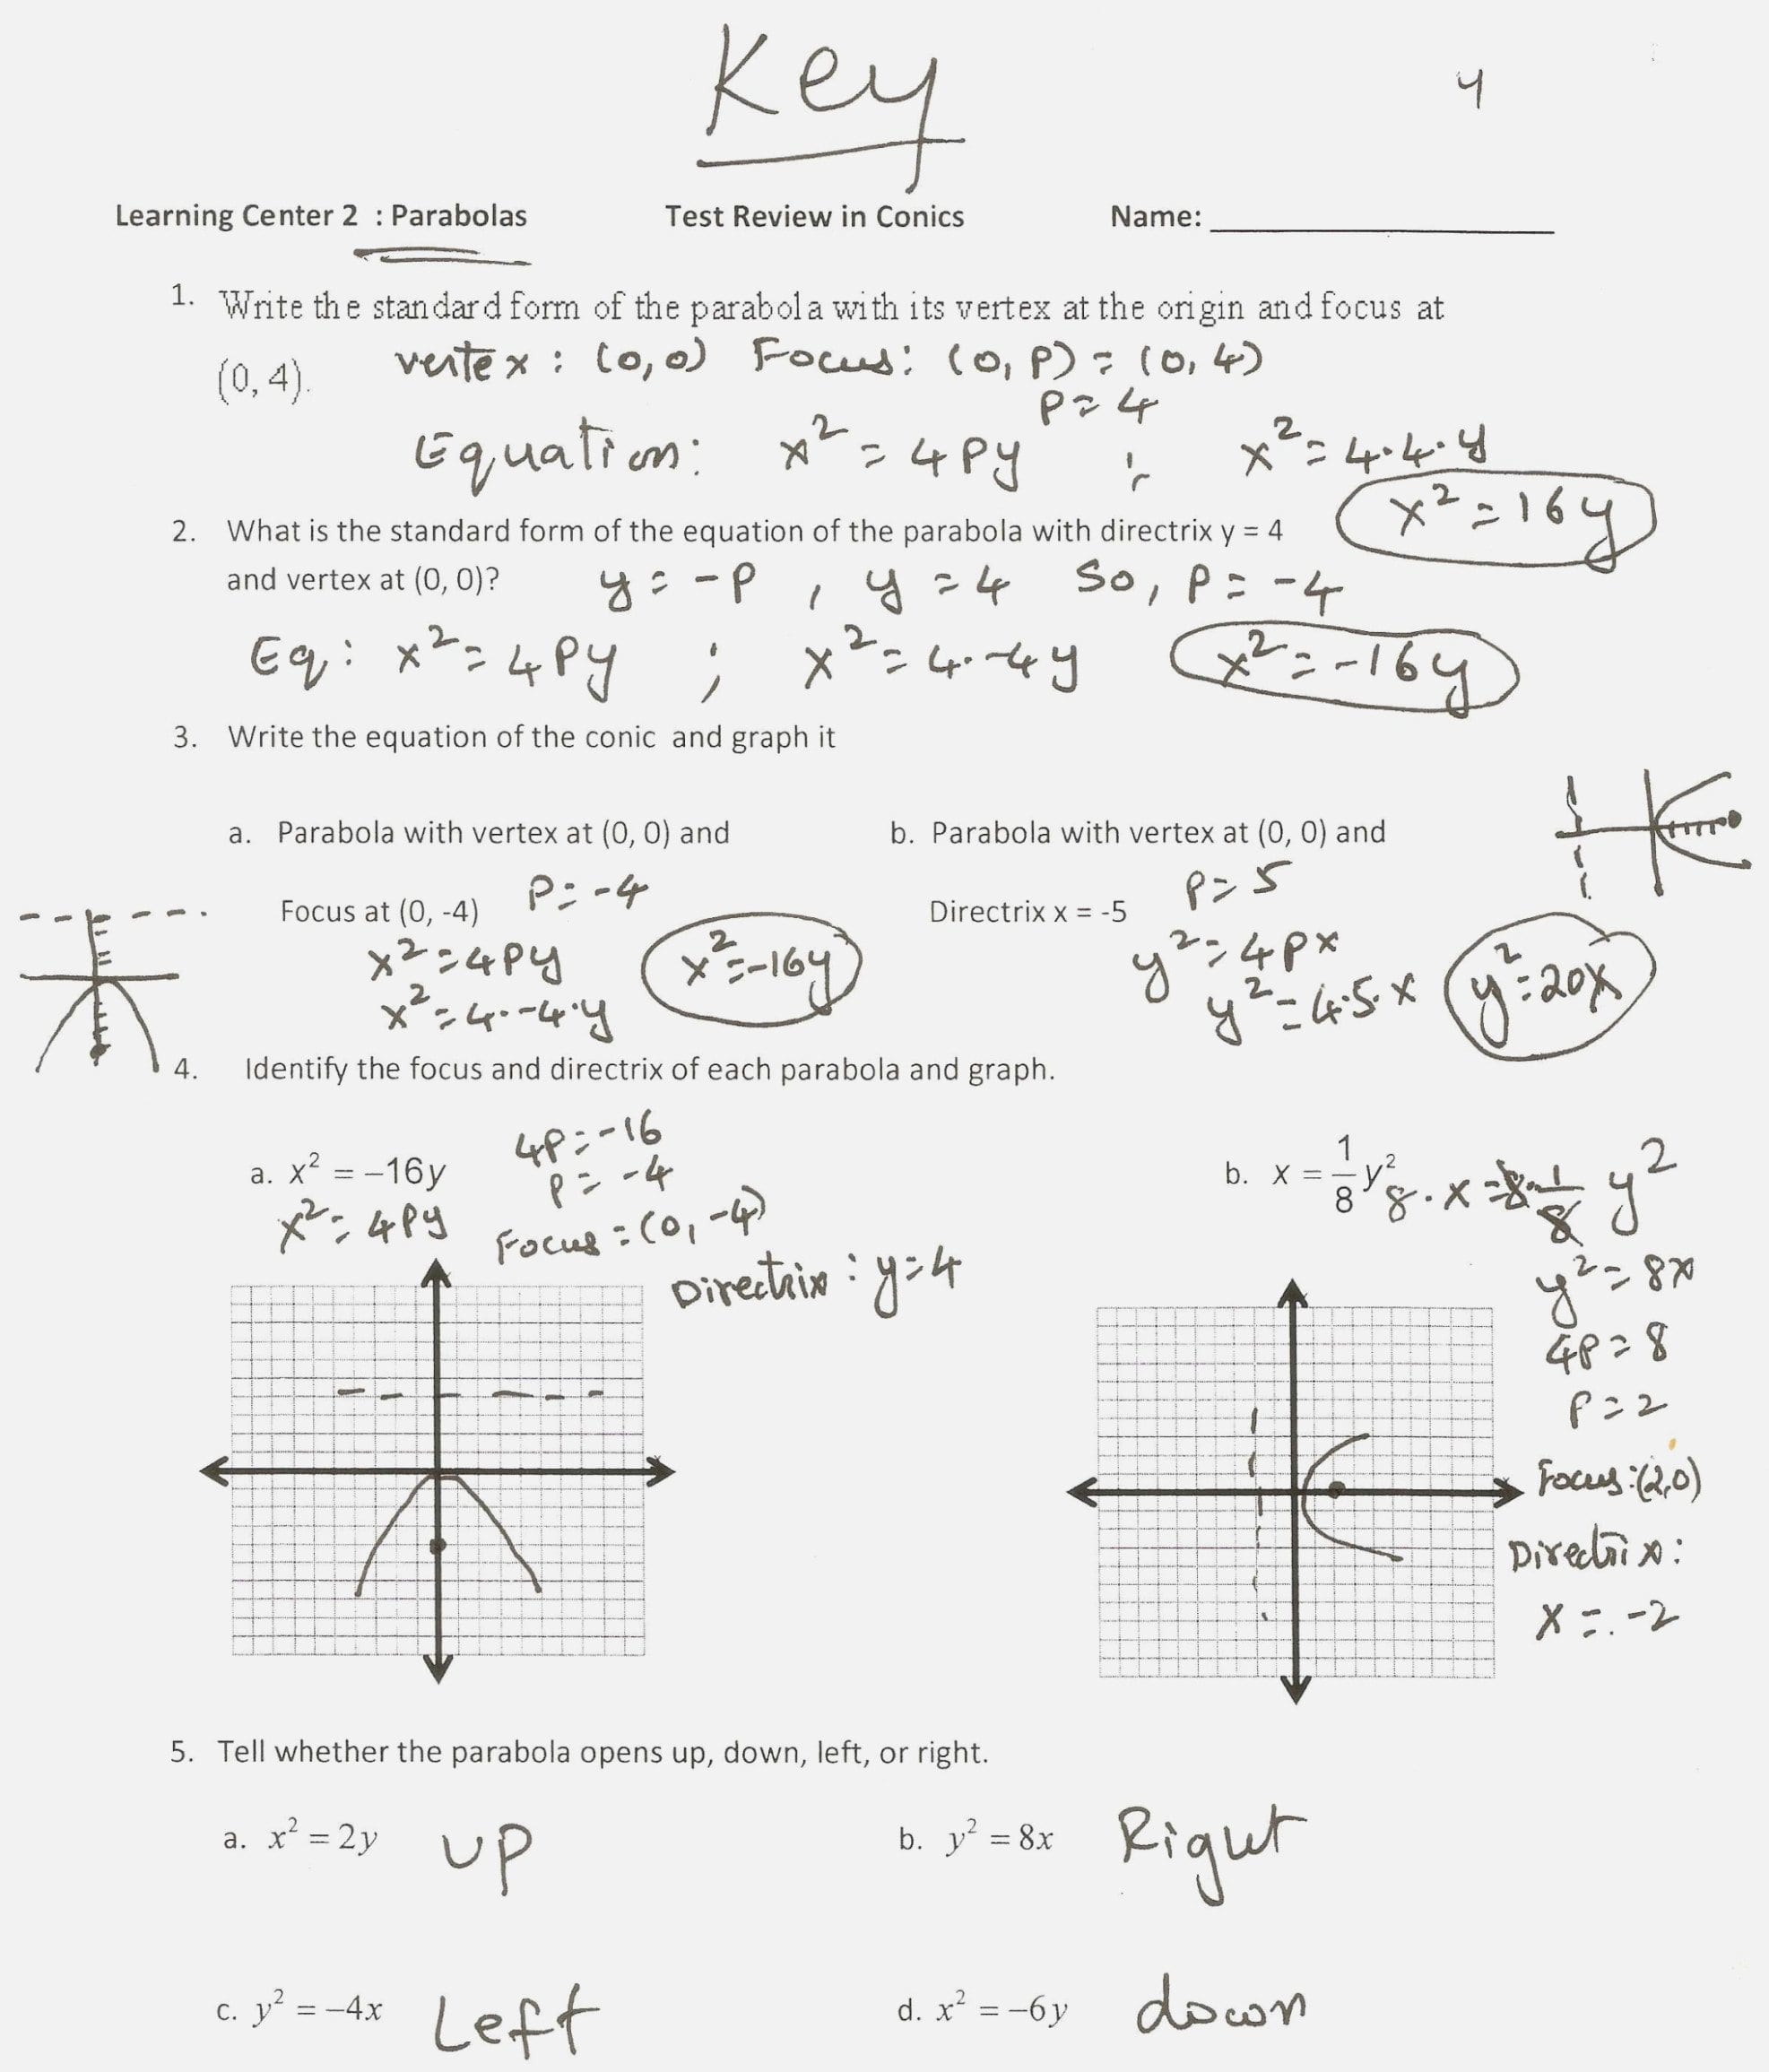 Graphing Quadratics Review Worksheet Method Of Graphing Parabolas In Intended For Graphing Quadratics Review Worksheet